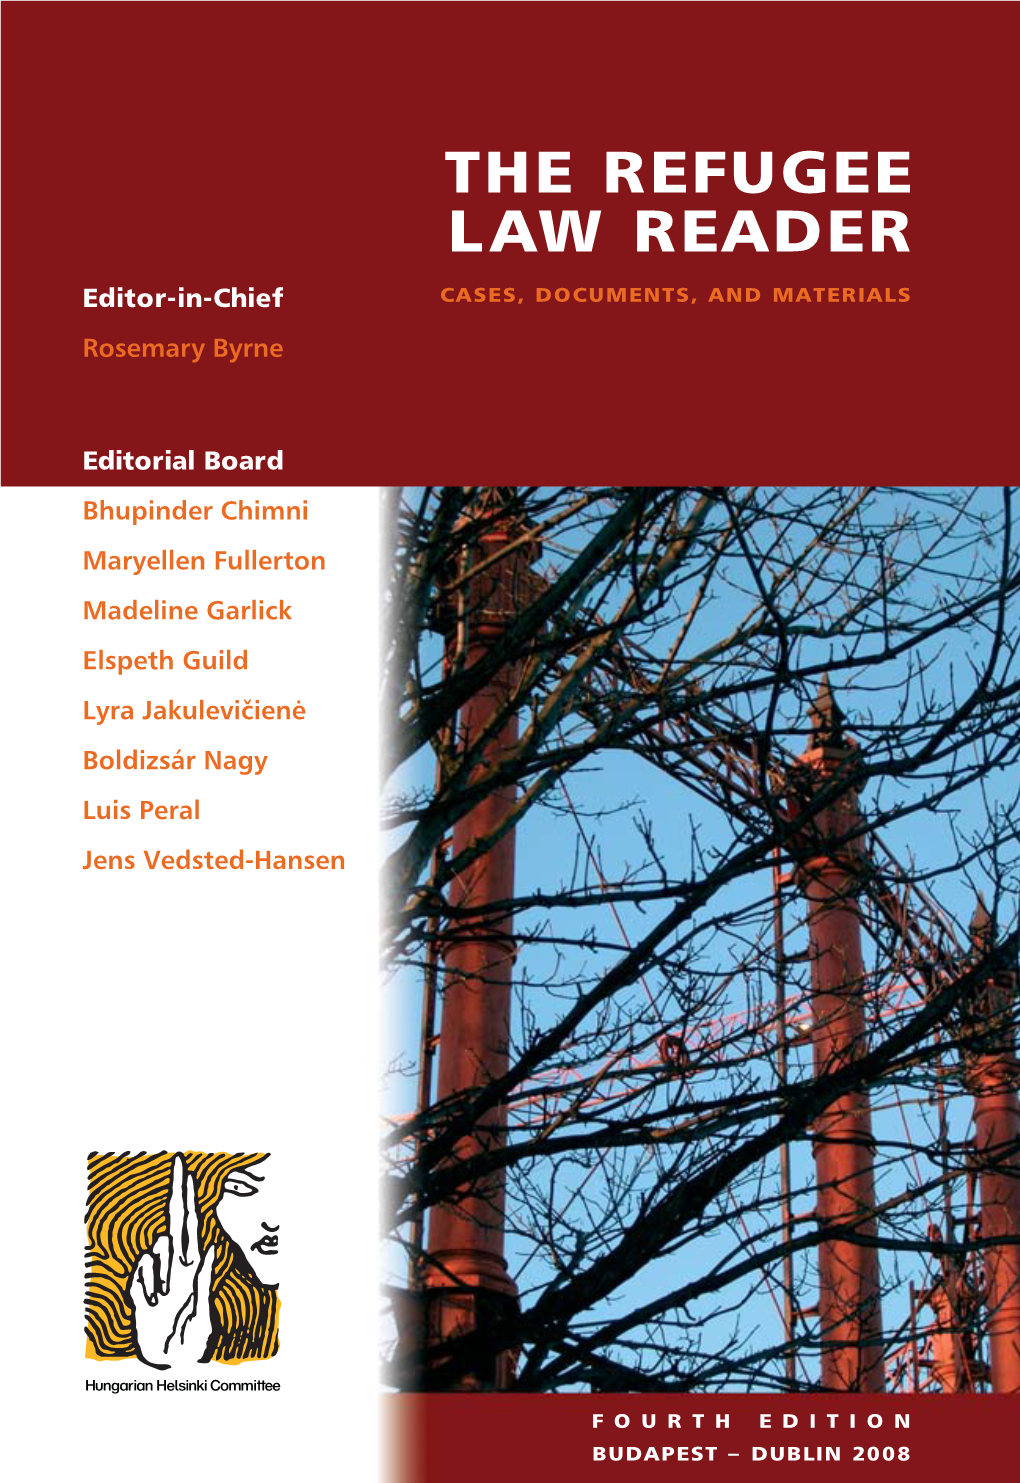 THE REFUGEE LAW READER Editor-In-Chief CASES, DOCUMENTS, and MATERIALS Rosemary Byrne